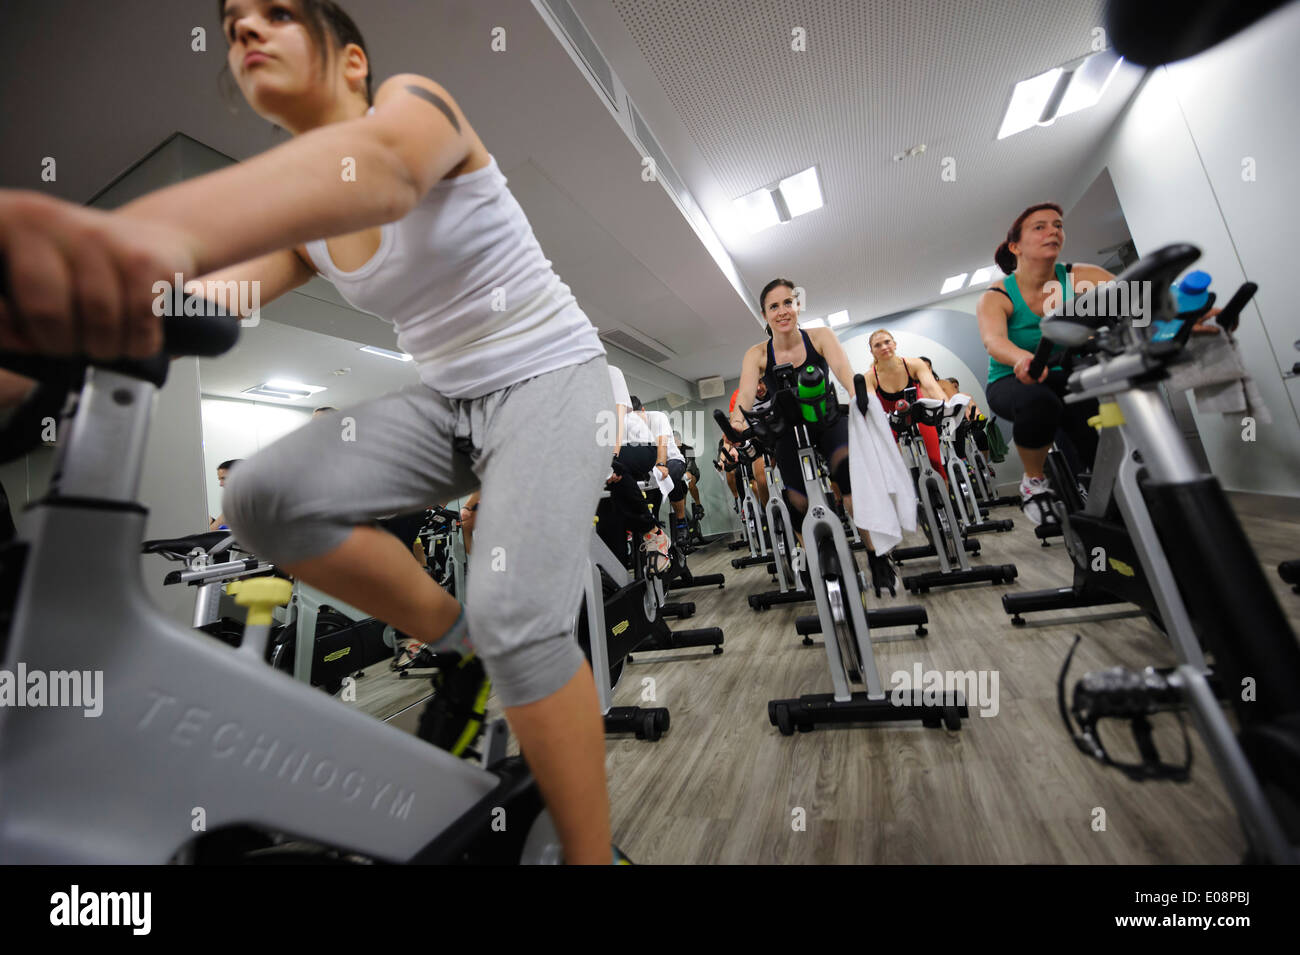 People riding stationary bicycles during a spinning class at the gym Stock Photo